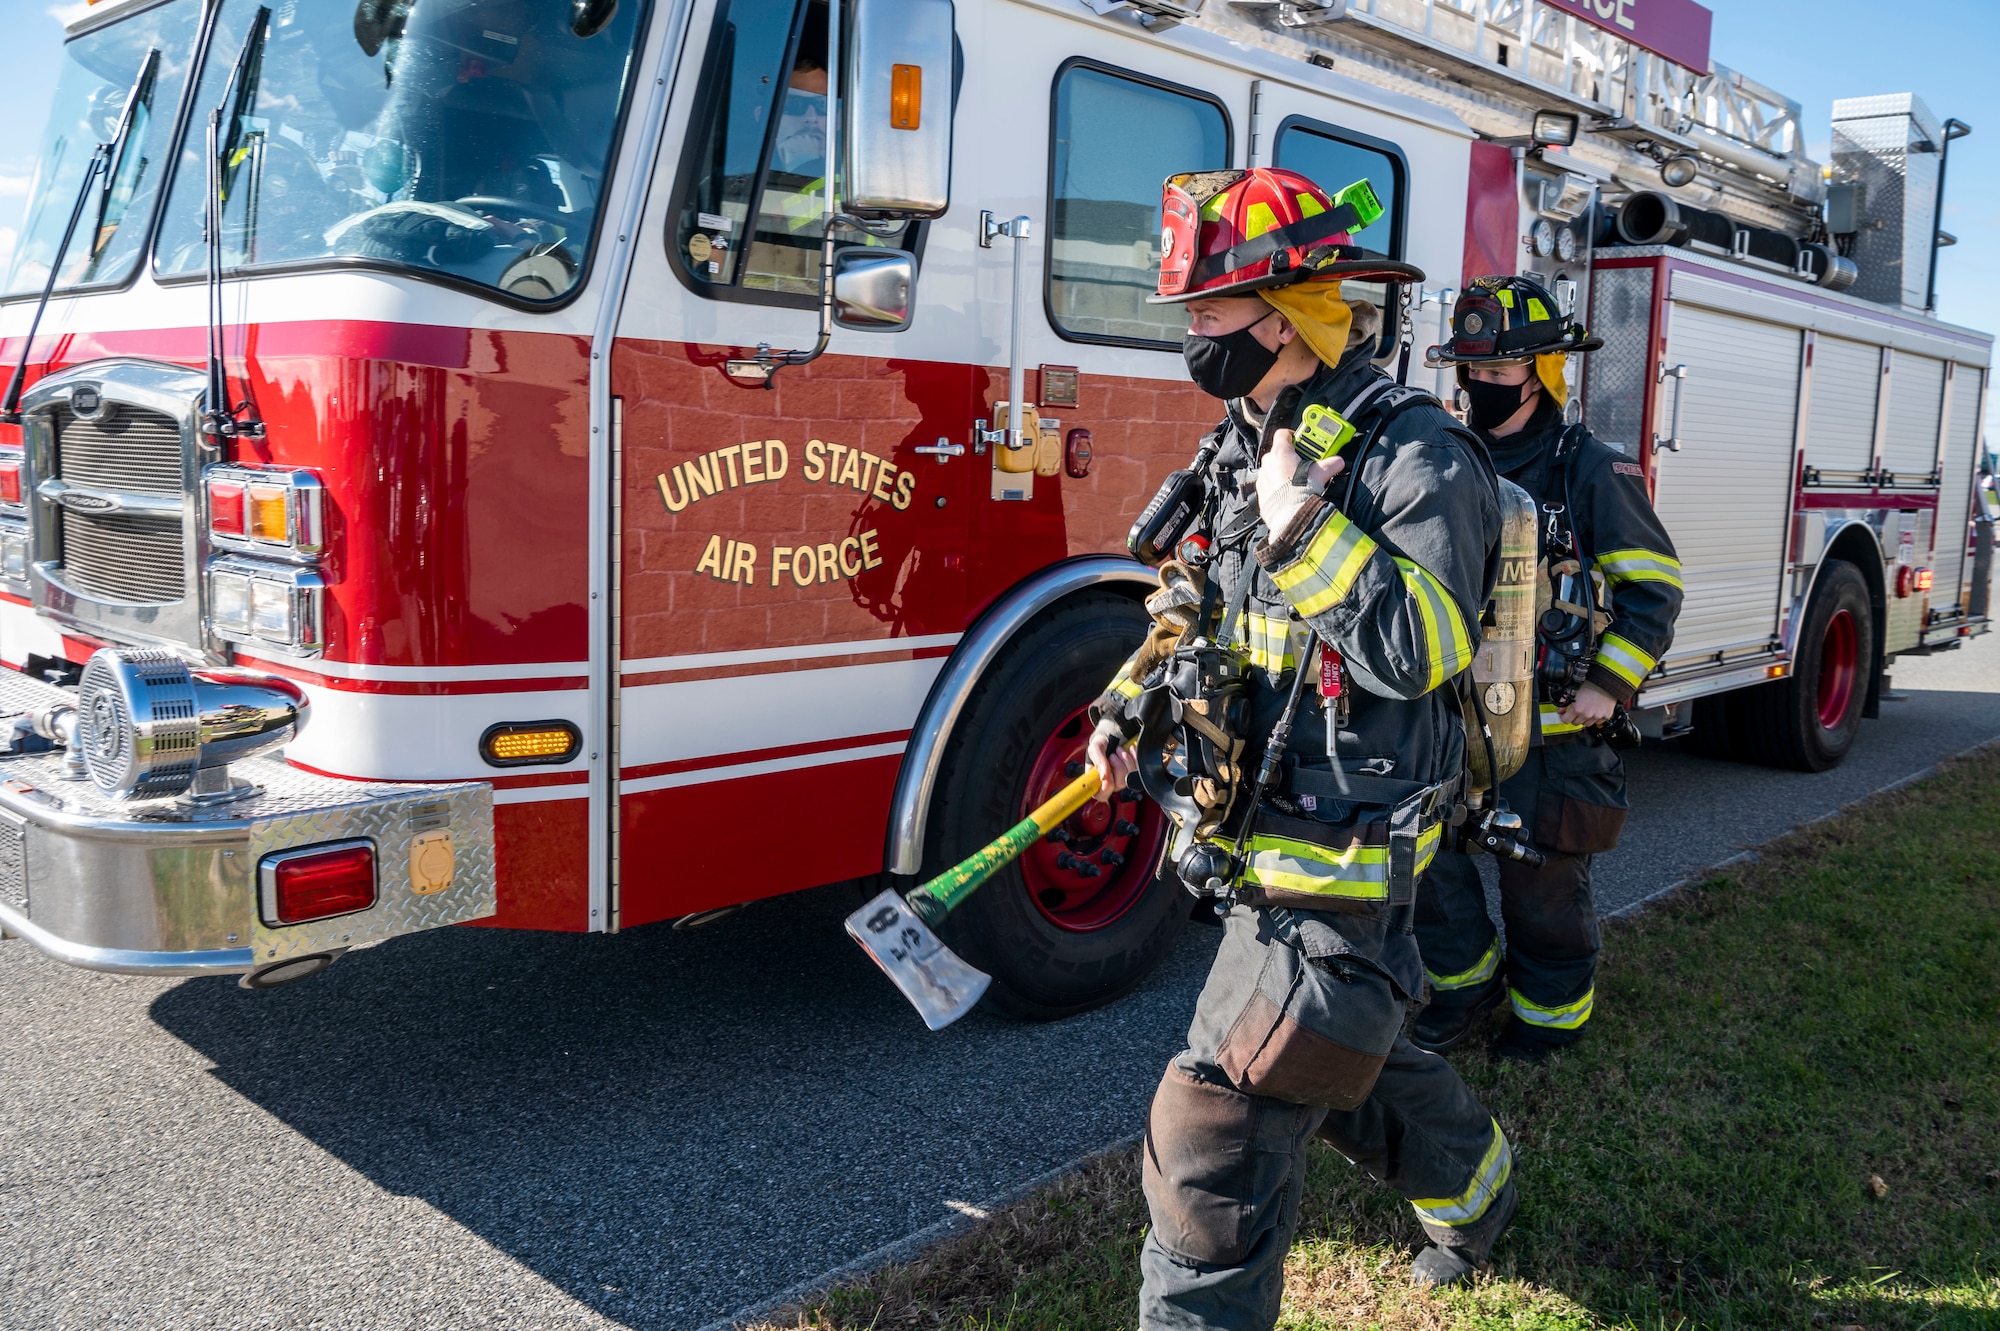 Firefighters from the 436th Civil Engineer Squadron prepare to search for a suspicious package during a force protection exercise scenario Nov. 18, 2020, at Dover Air Force Base, Delaware. Team Dover first responders were tested through numerous scenarios, ensuring the safety of base personnel and assets. (U.S. Air Force photo by Senior Airman Christopher Quail)